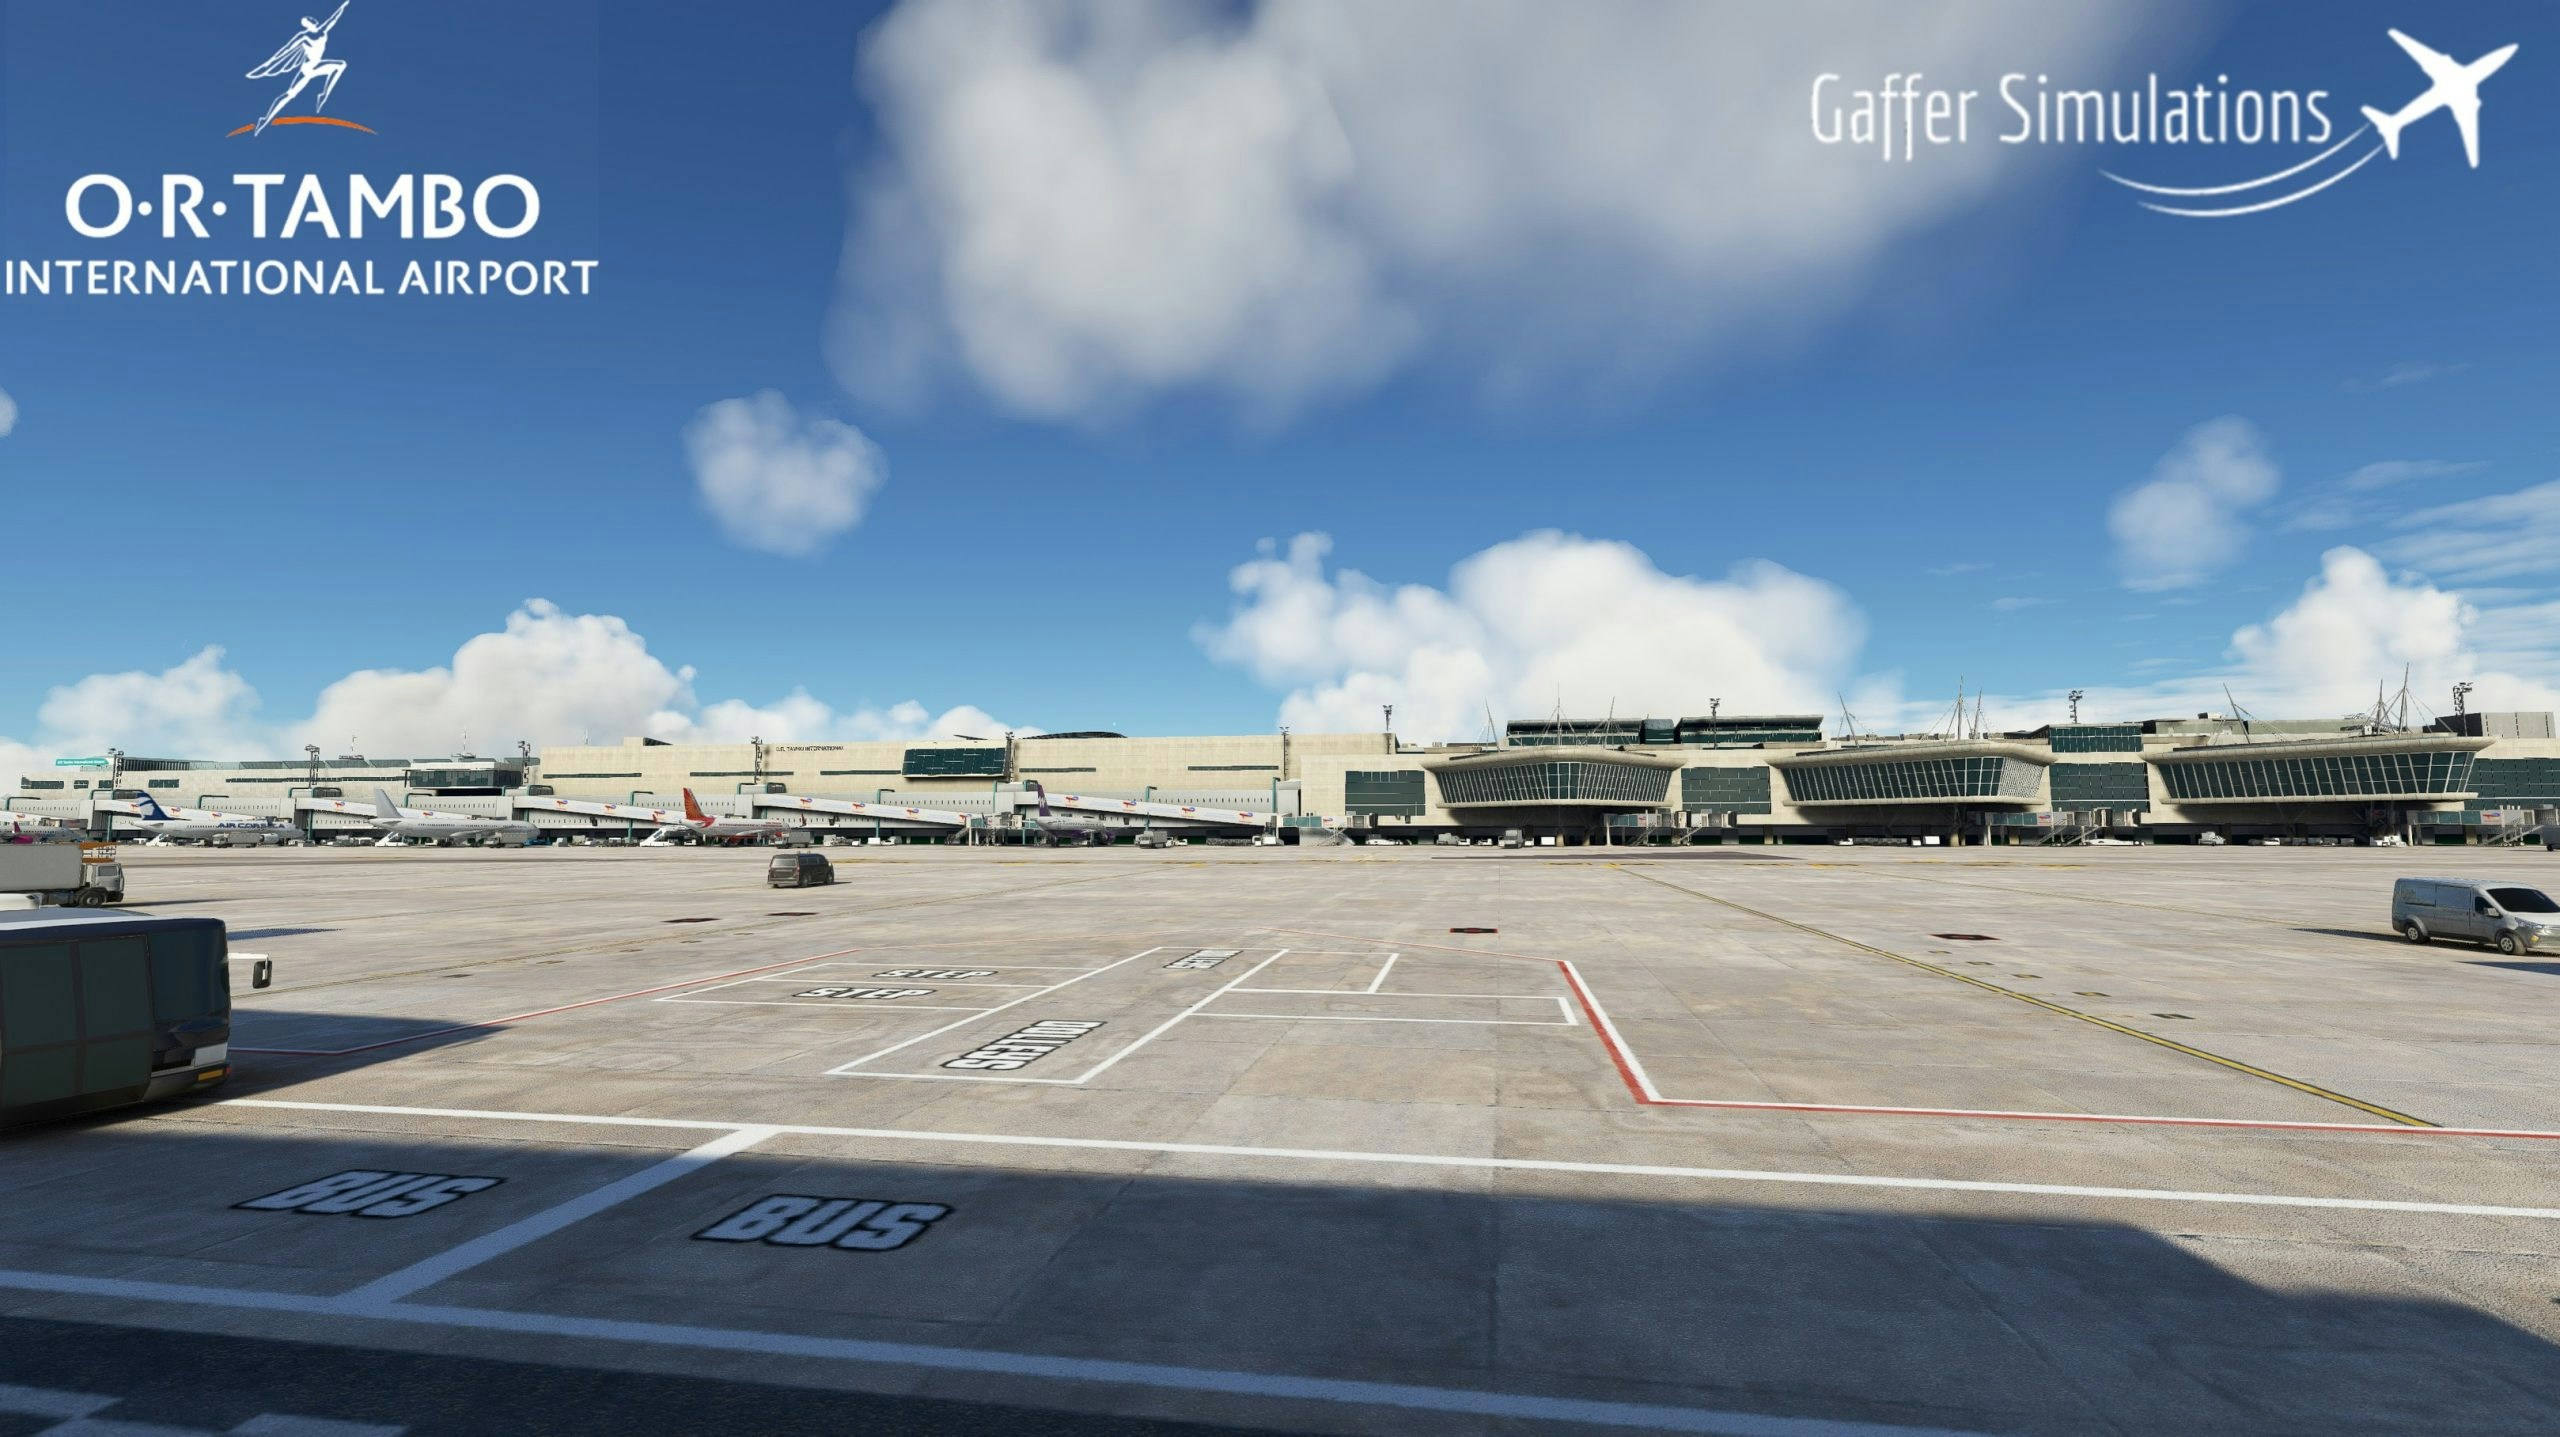 GafferSimulations releases O.R. Tambo International Airport for MSFS